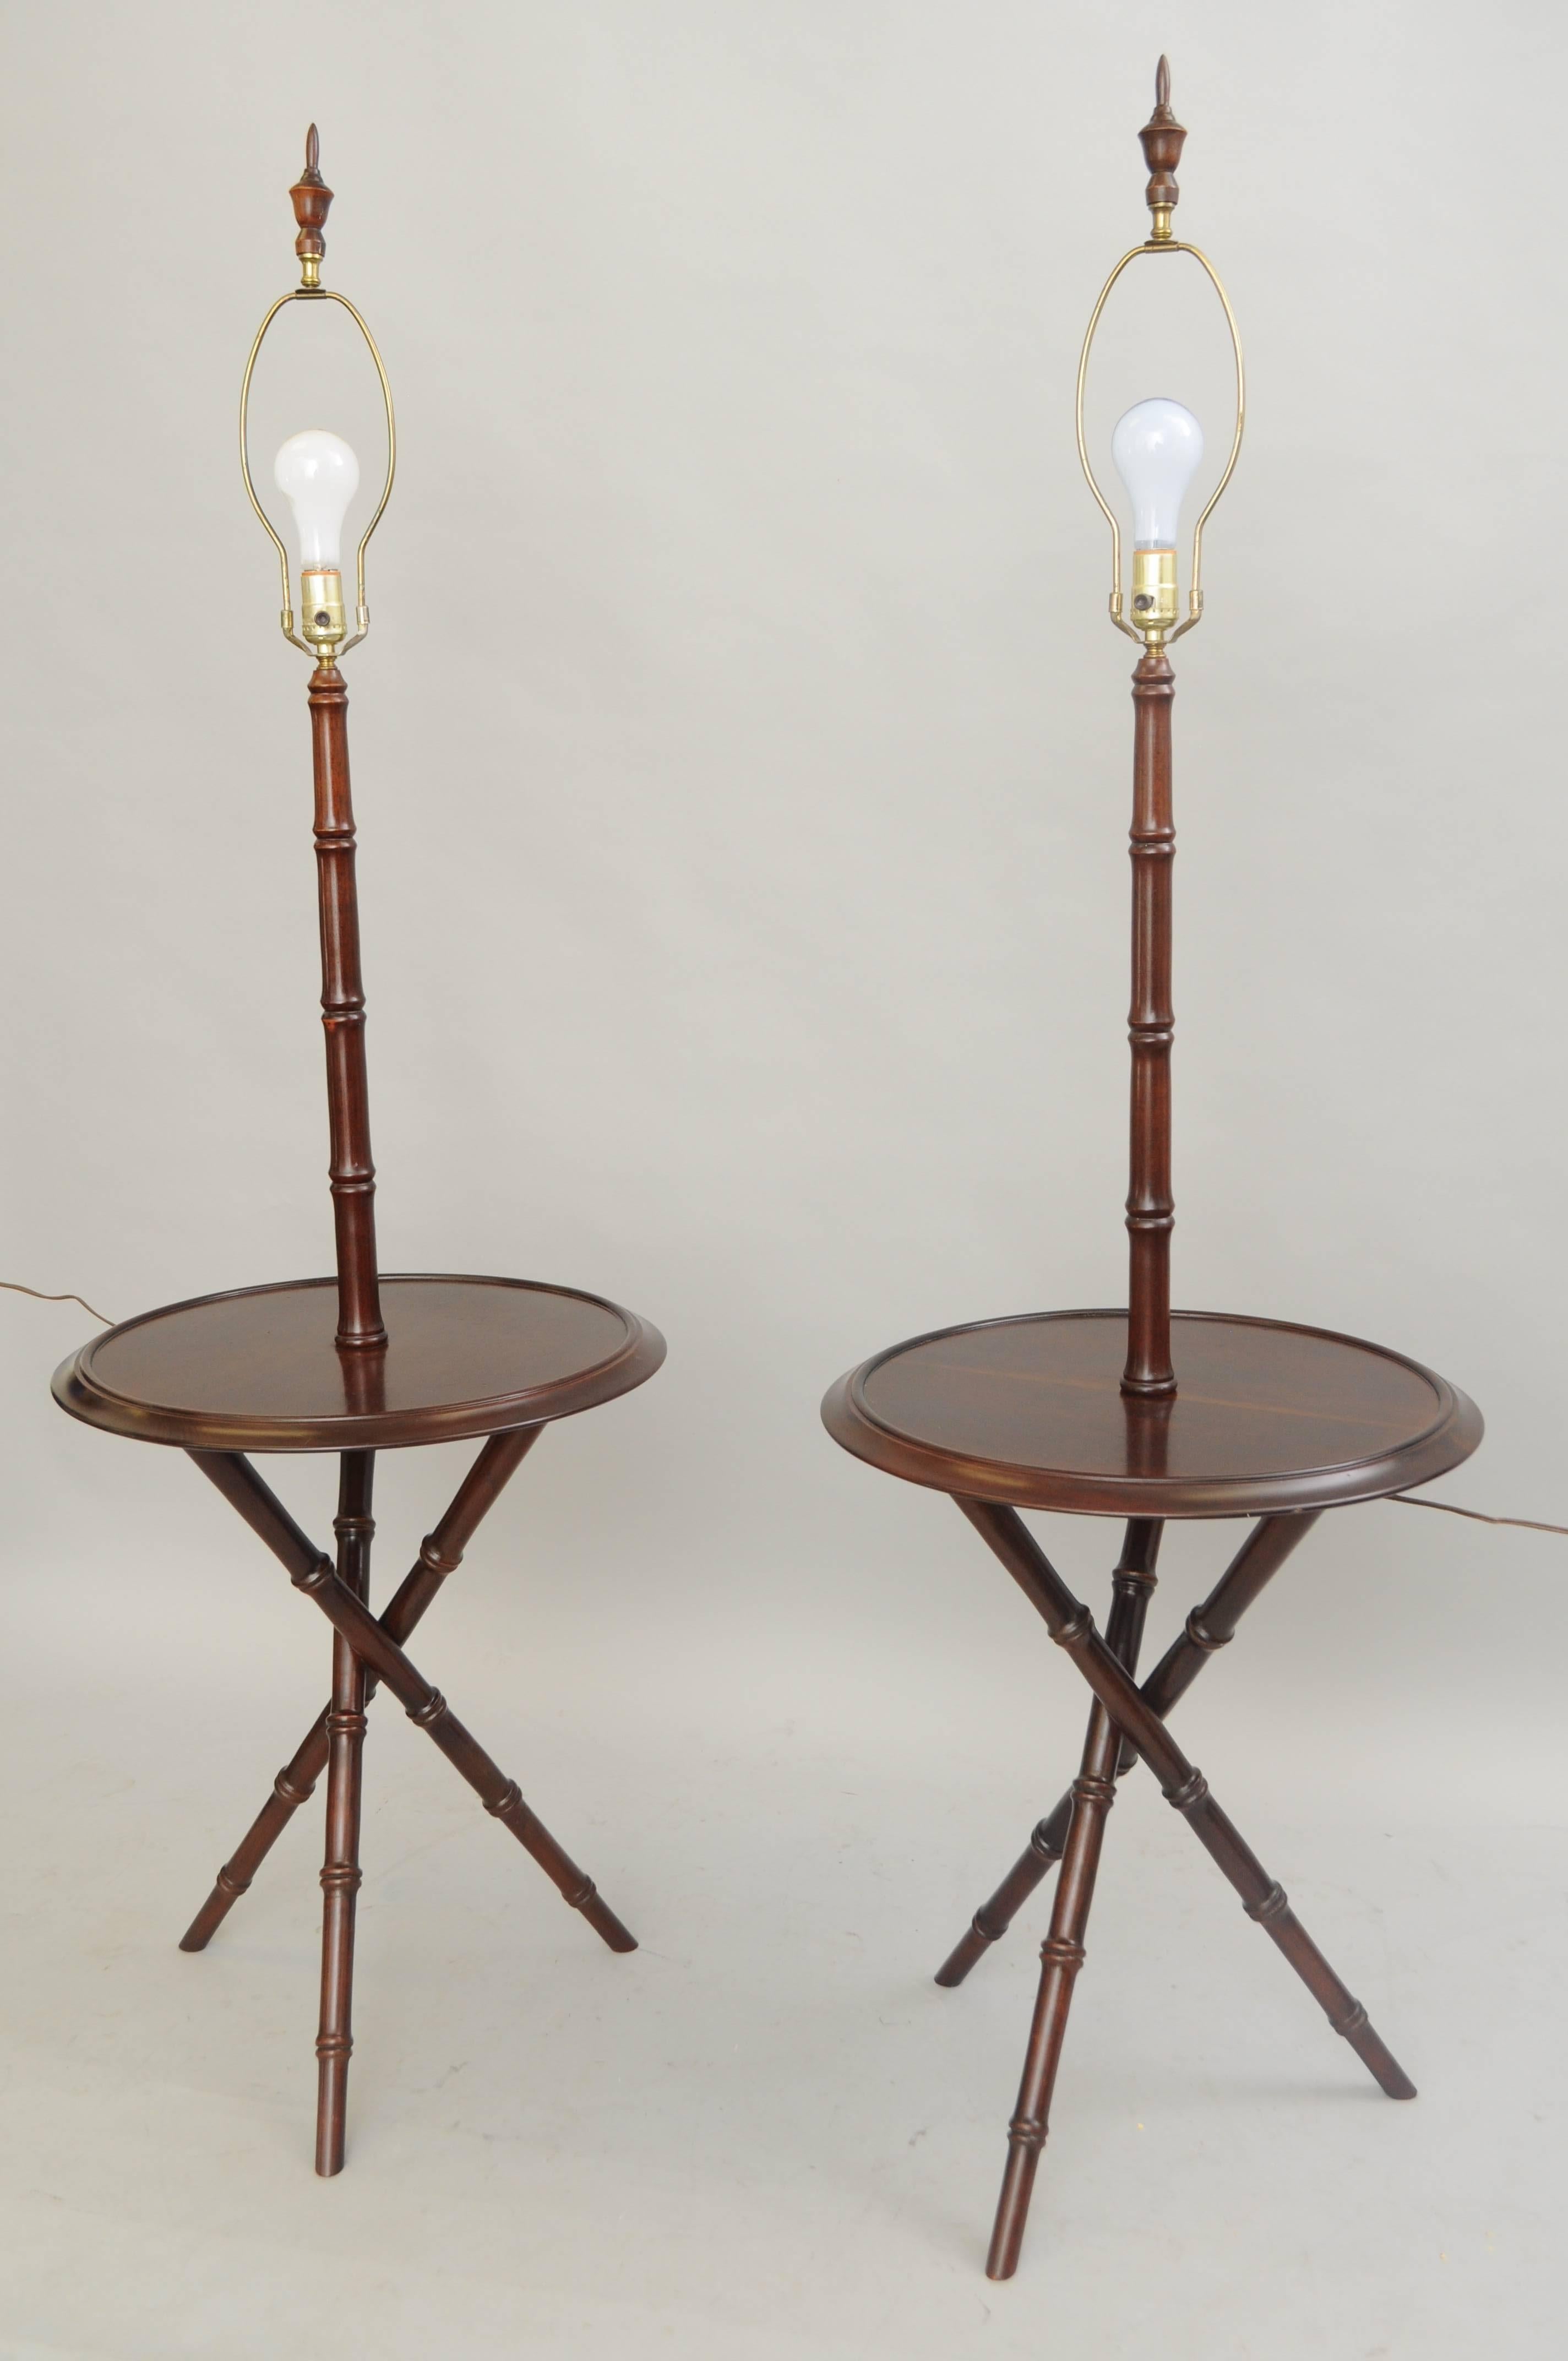 20th Century Pair of Chinese Chippendale Faux Bamboo Wood Tripod Floor Lamp Round End Tables